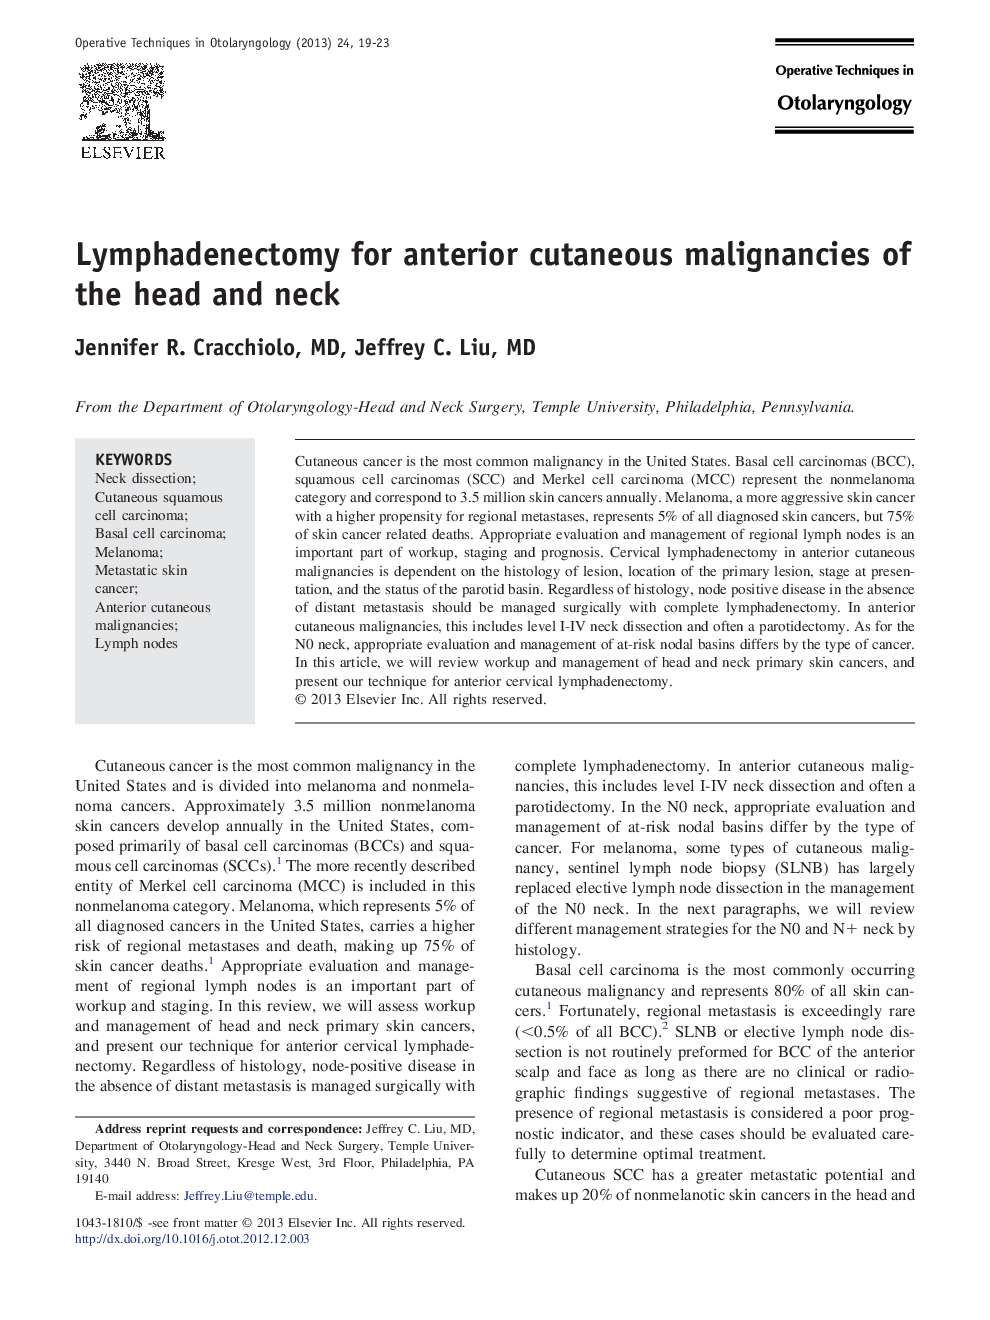 Lymphadenectomy for anterior cutaneous malignancies of the head and neck